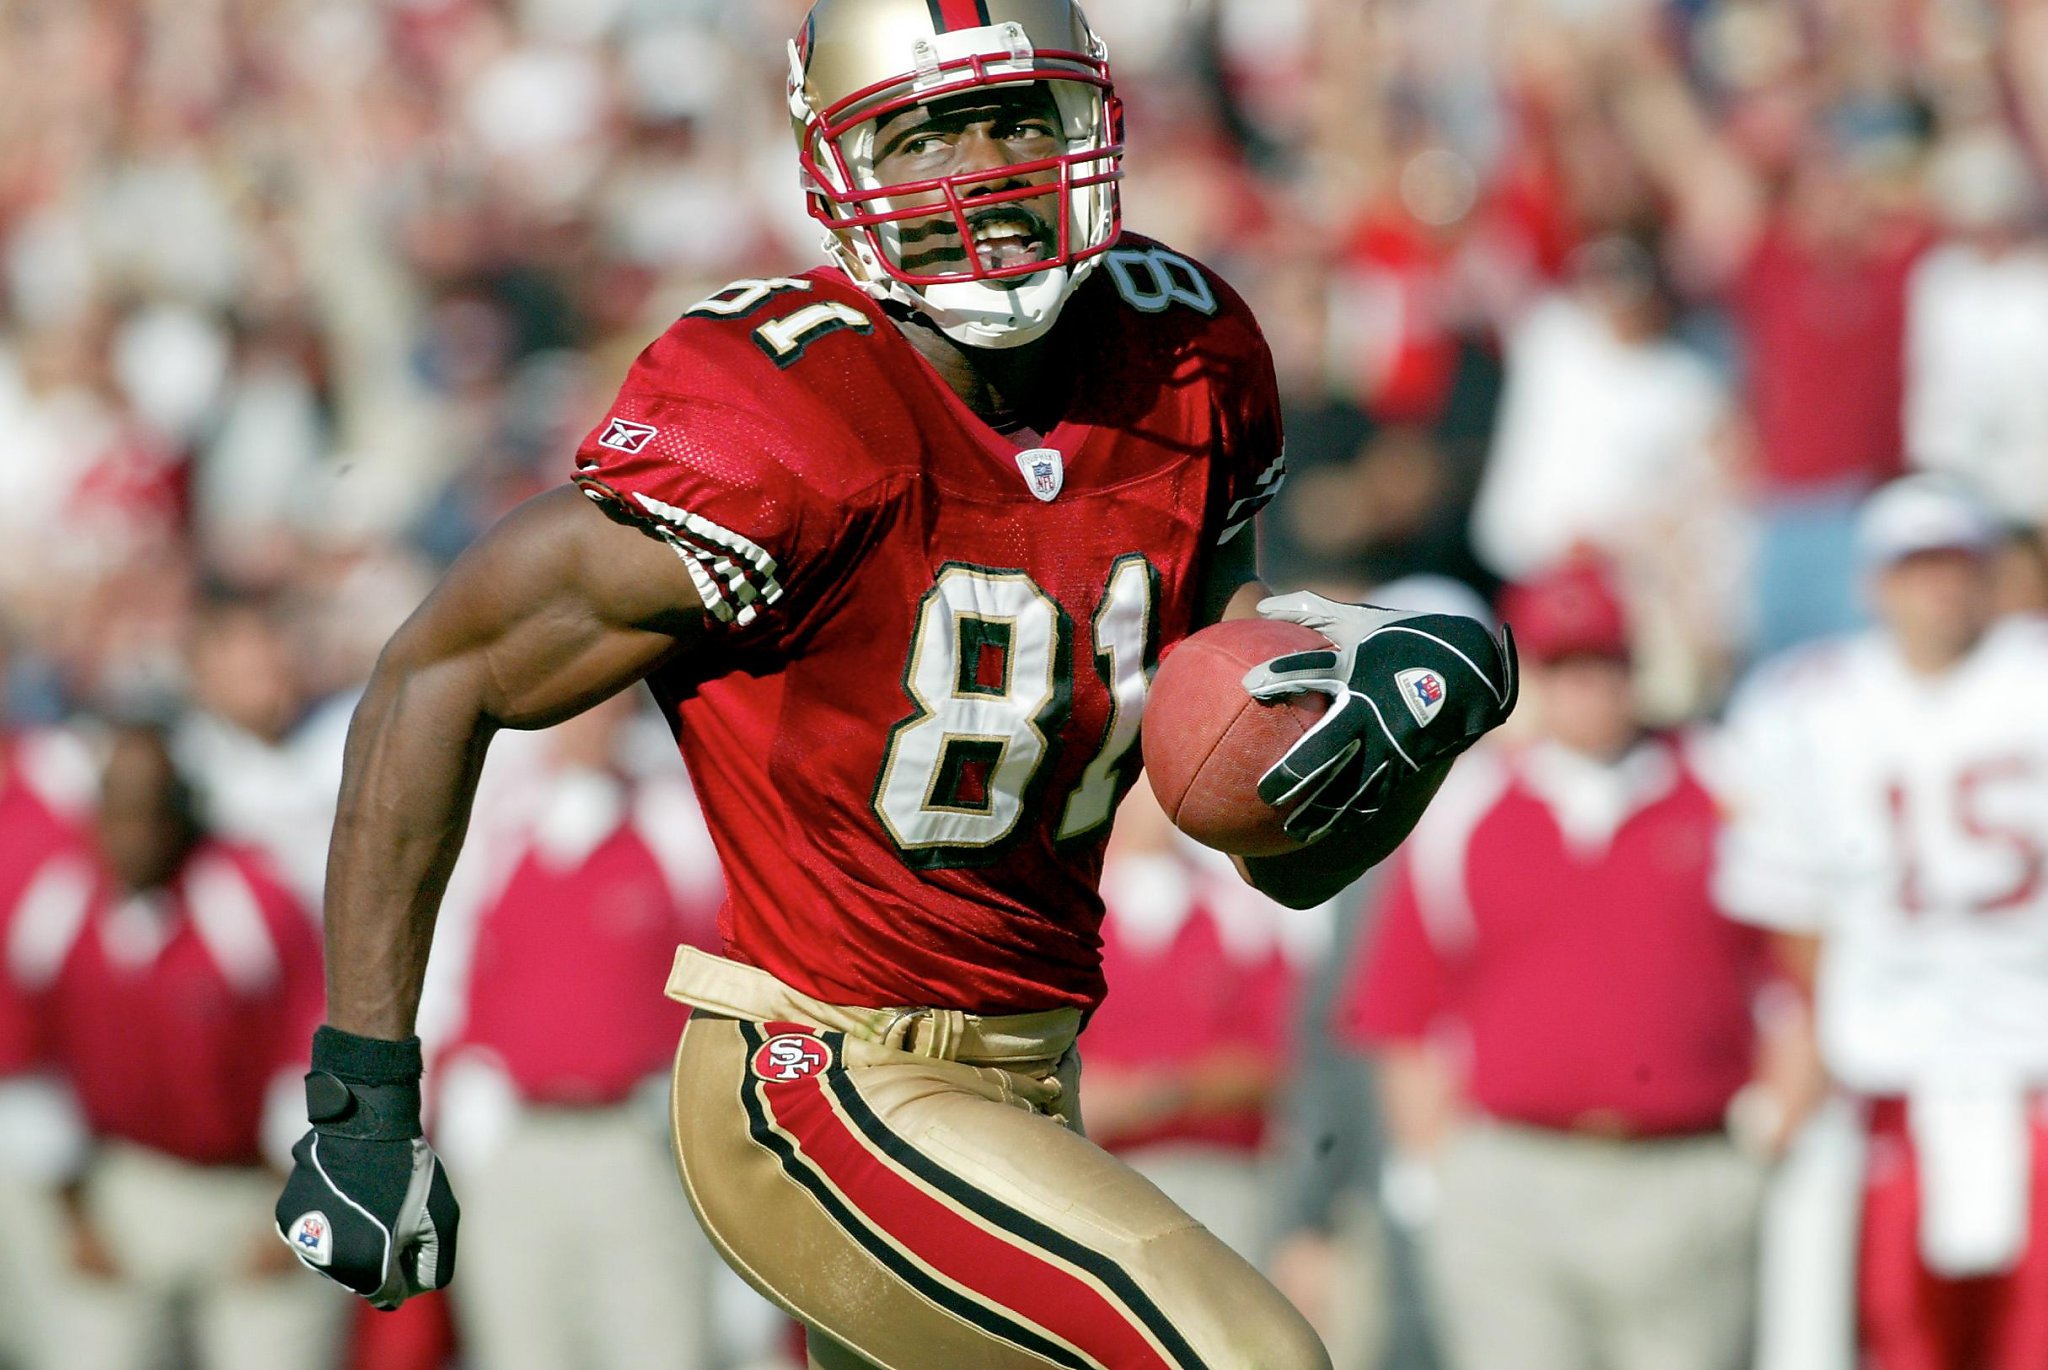 Terrell Owens is 48 years old and still catching TD passes